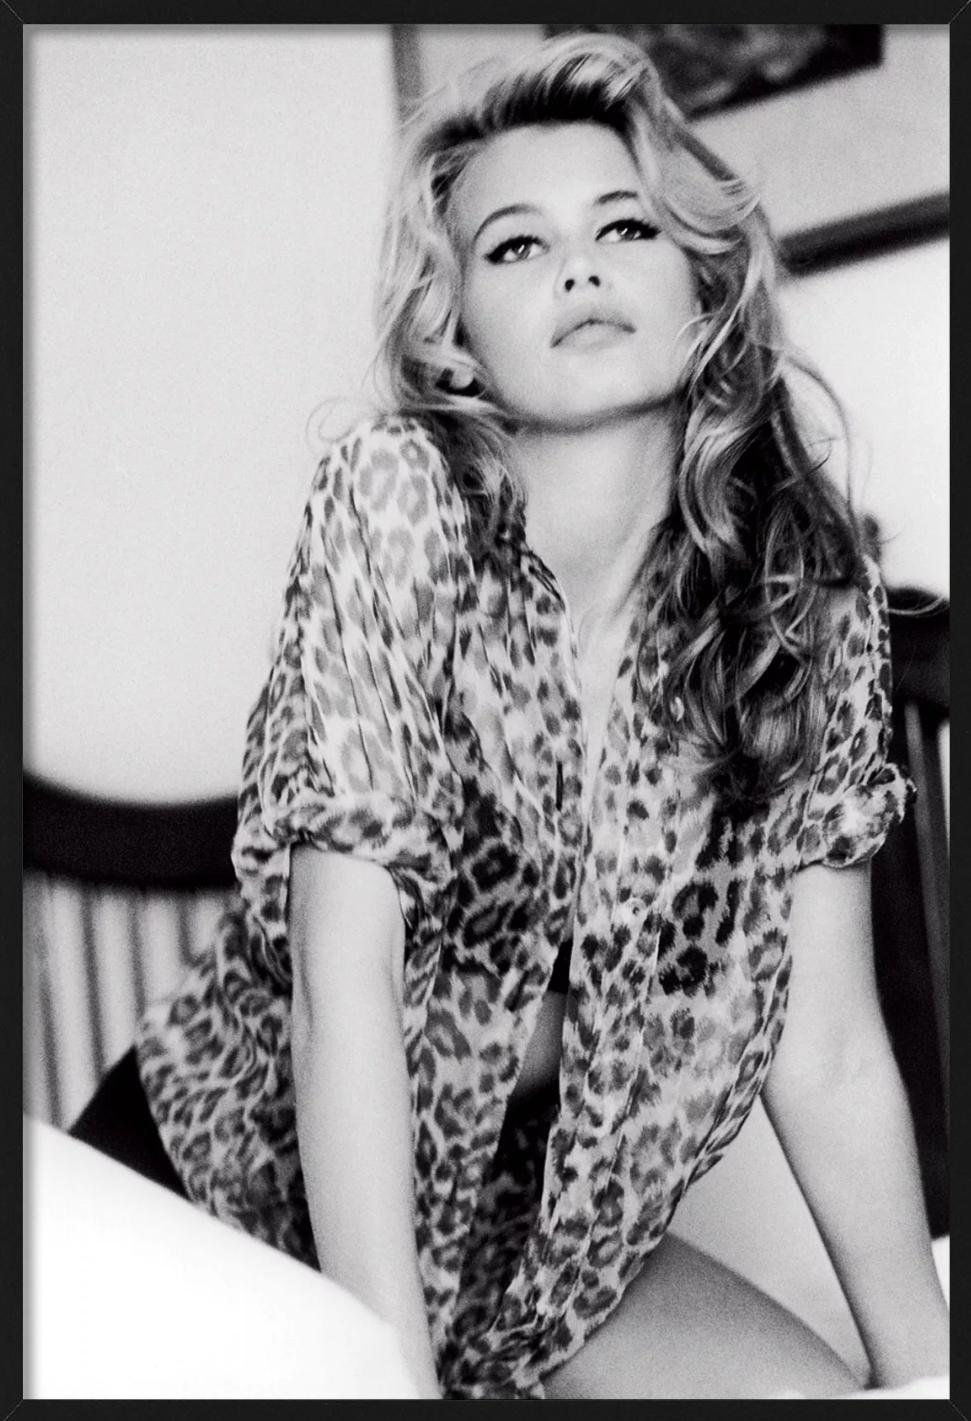 Claudia Schiffer in a leopard print blouse, sitting on a bed. Photographed by Ellen von Unwerth for Guess in Morocco in 1990.

All prints are limited edition. Available in multiple sizes. High-end framing on request.

All prints are done and signed